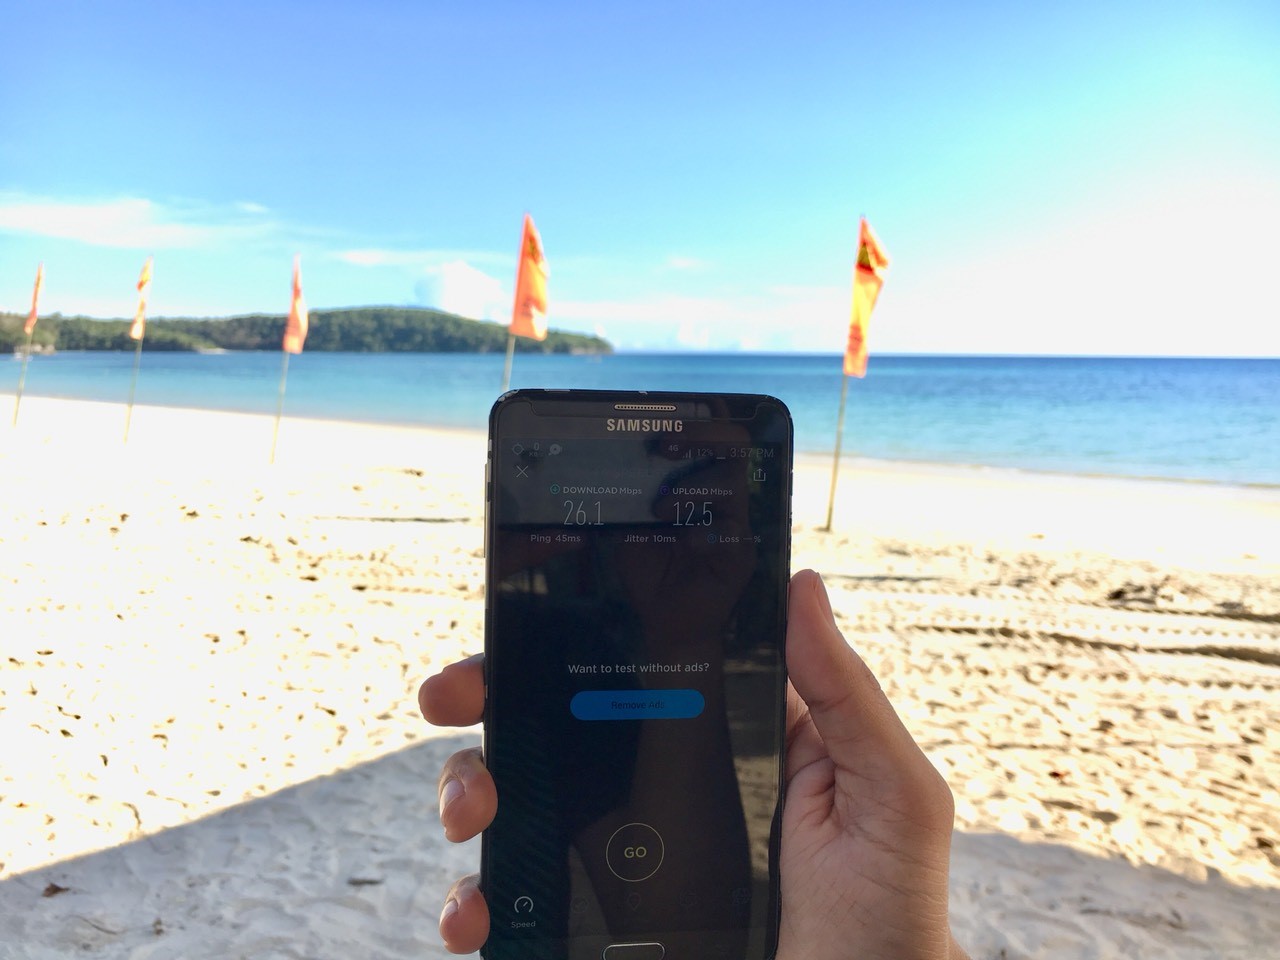 Speeds of between 20 to 40 Mbps have been recorded in Gumasa, Sarangani after Smart recently fired up LTE-A in the area.